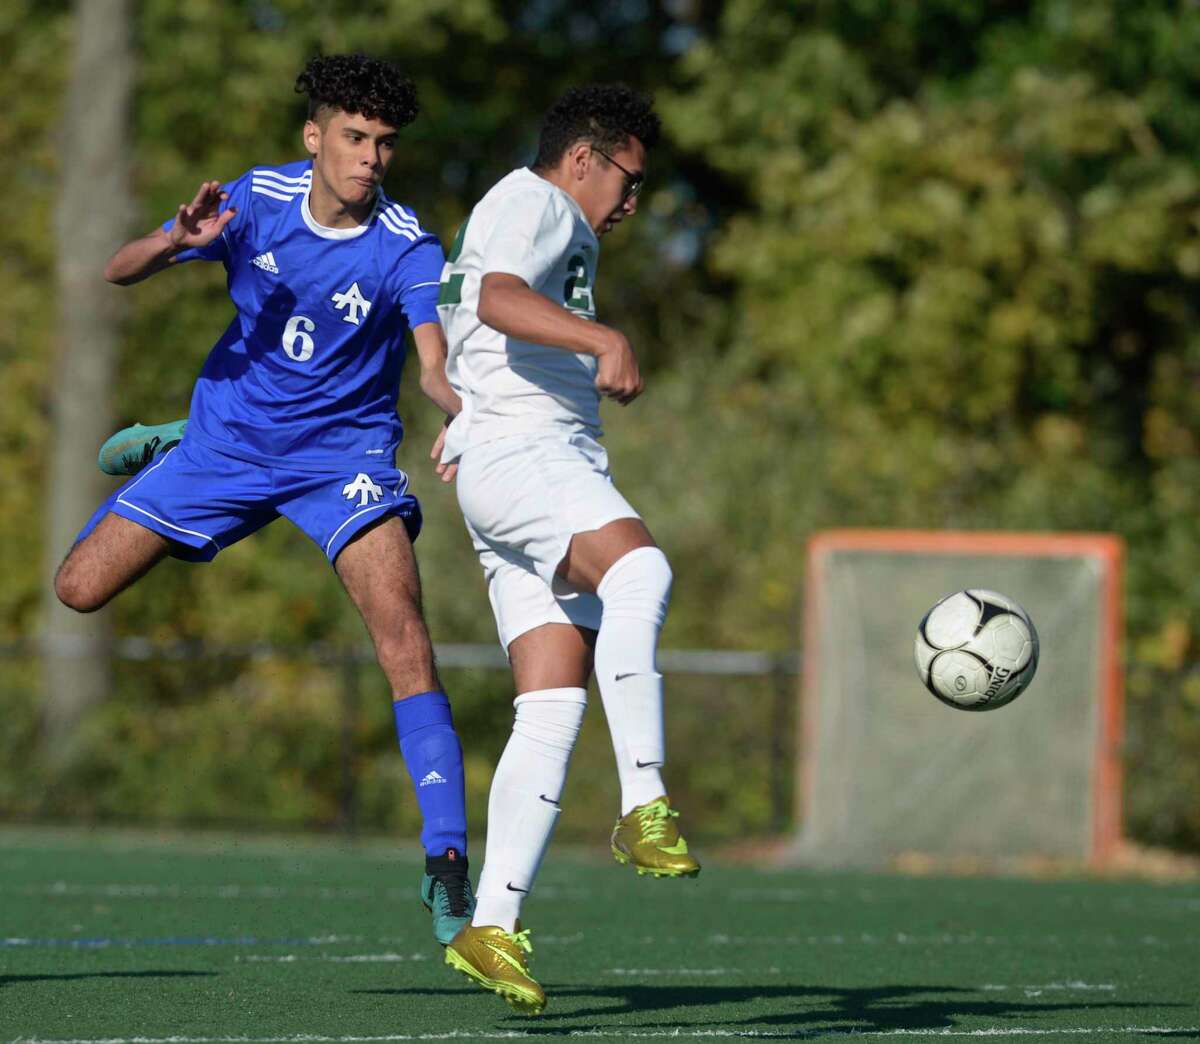 Abbott Tech’s Santiago Idrobo (6) and New Milford’s Yousef Eltoukhy (22) fight for the ball.